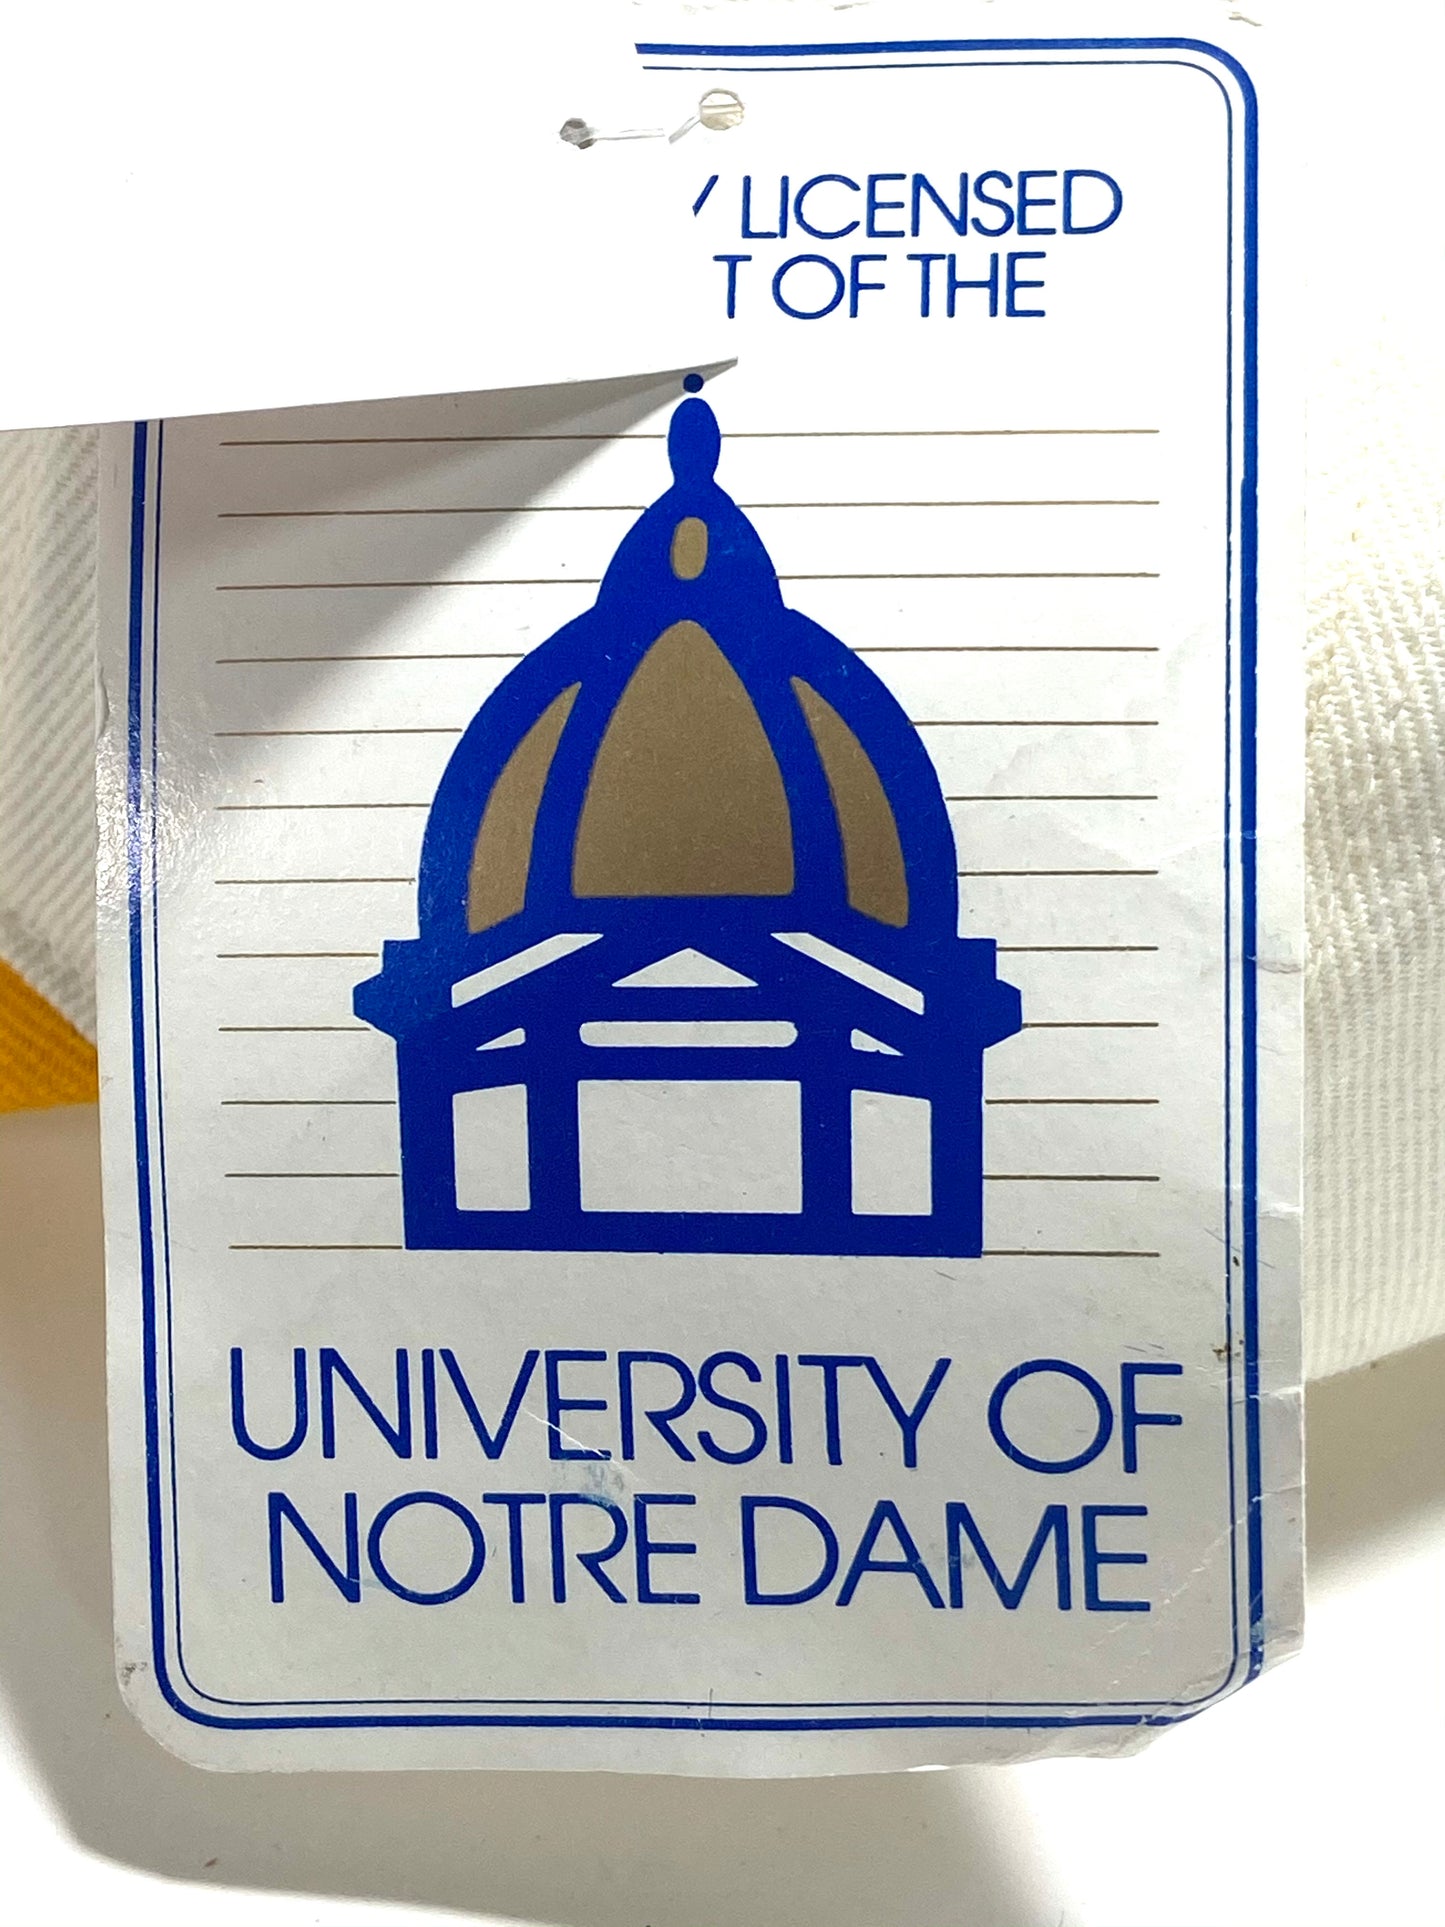 Notre Dame Vintage Late '90s NCAA 20% Wool Logo Cap by Annco